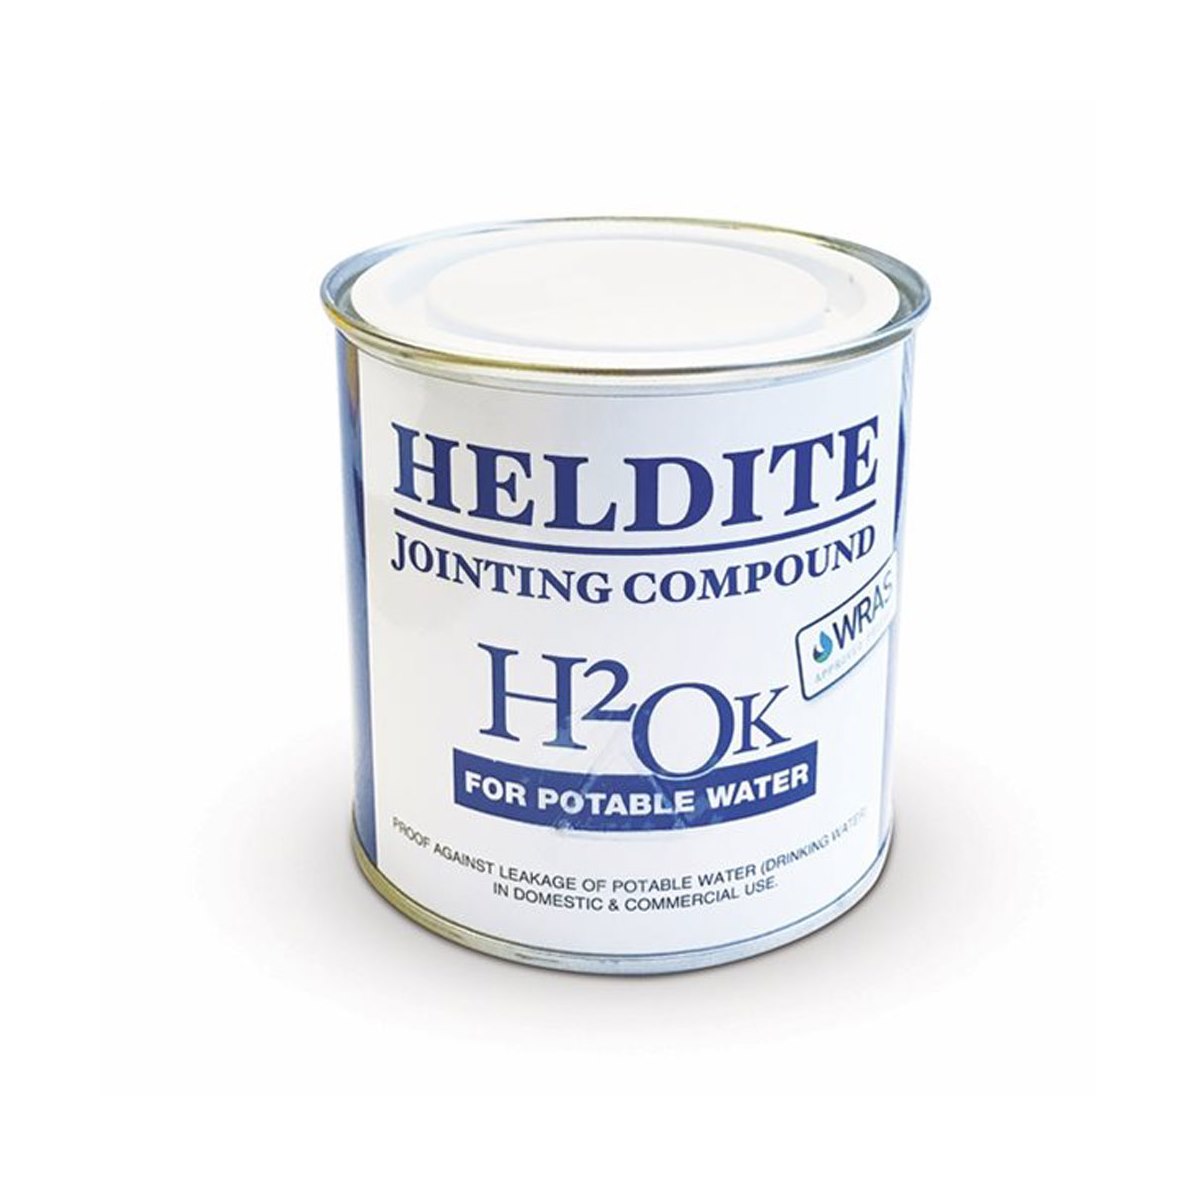 Heldite Jointing Compound H2OK For Potable Water 250ml